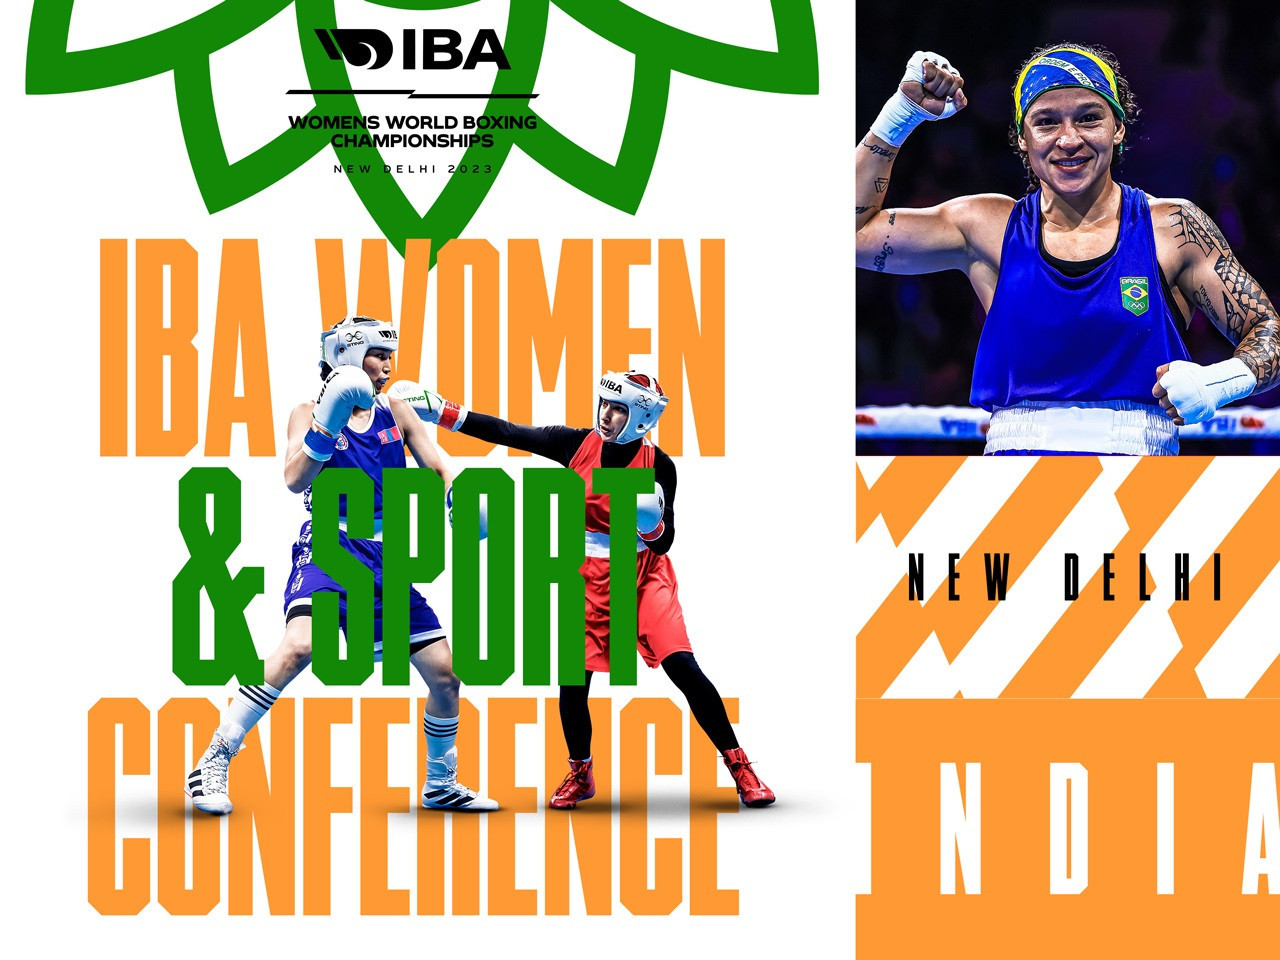 IBA Women and Sport Conference can leave "game-changing legacy", claims Kremlev